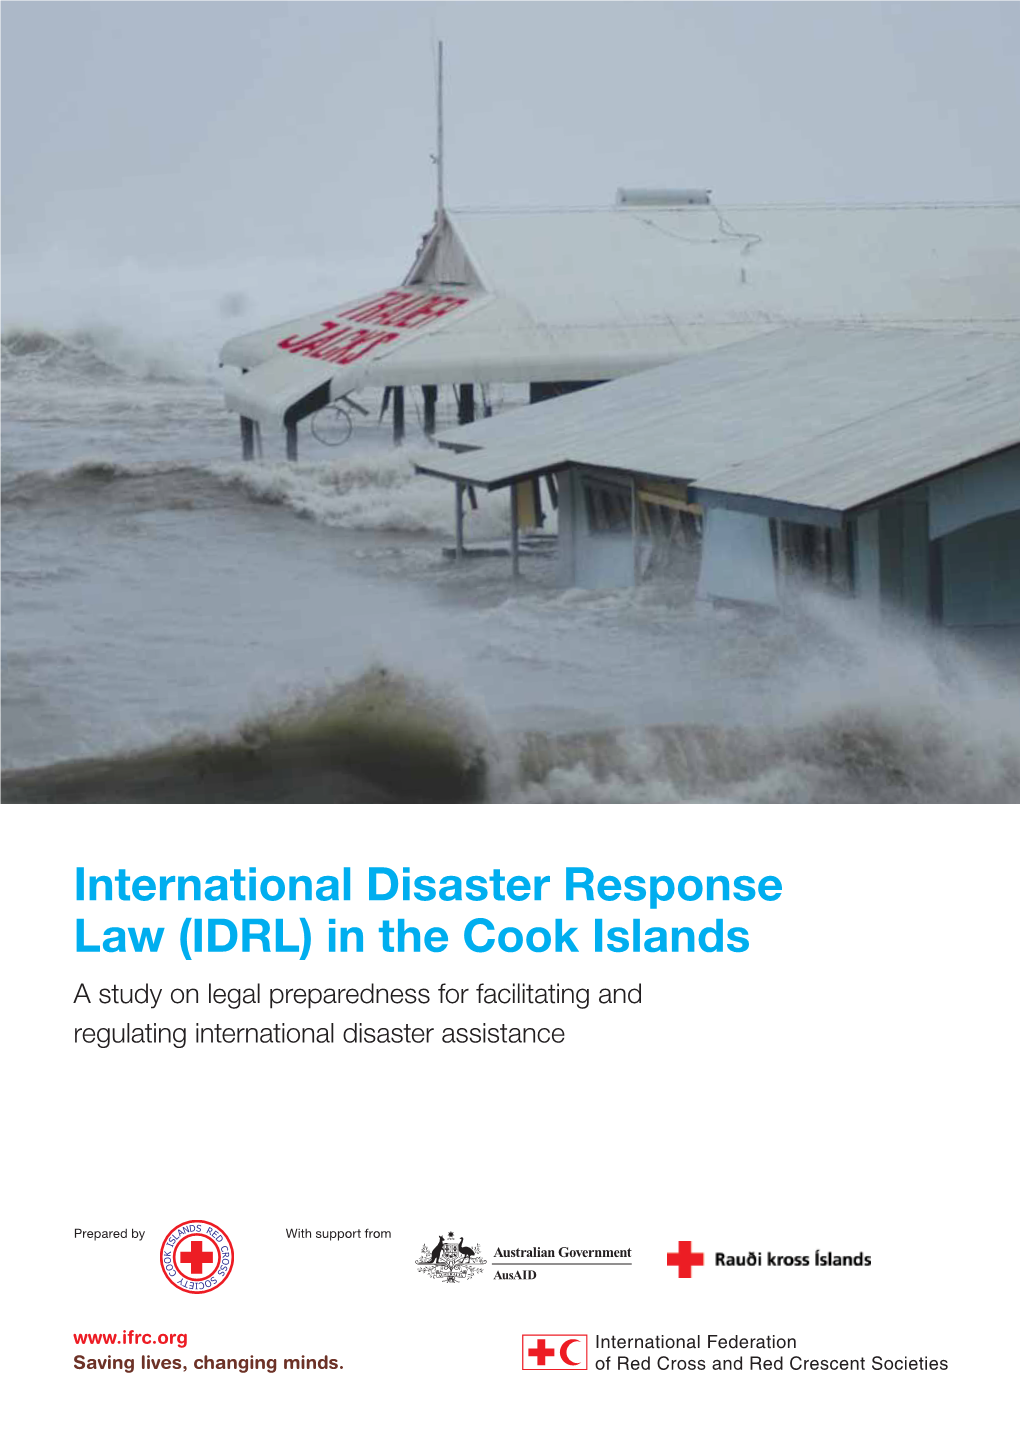 In the Cook Islands a Study on Legal Preparedness for Facilitating and Regulating International Disaster Assistance